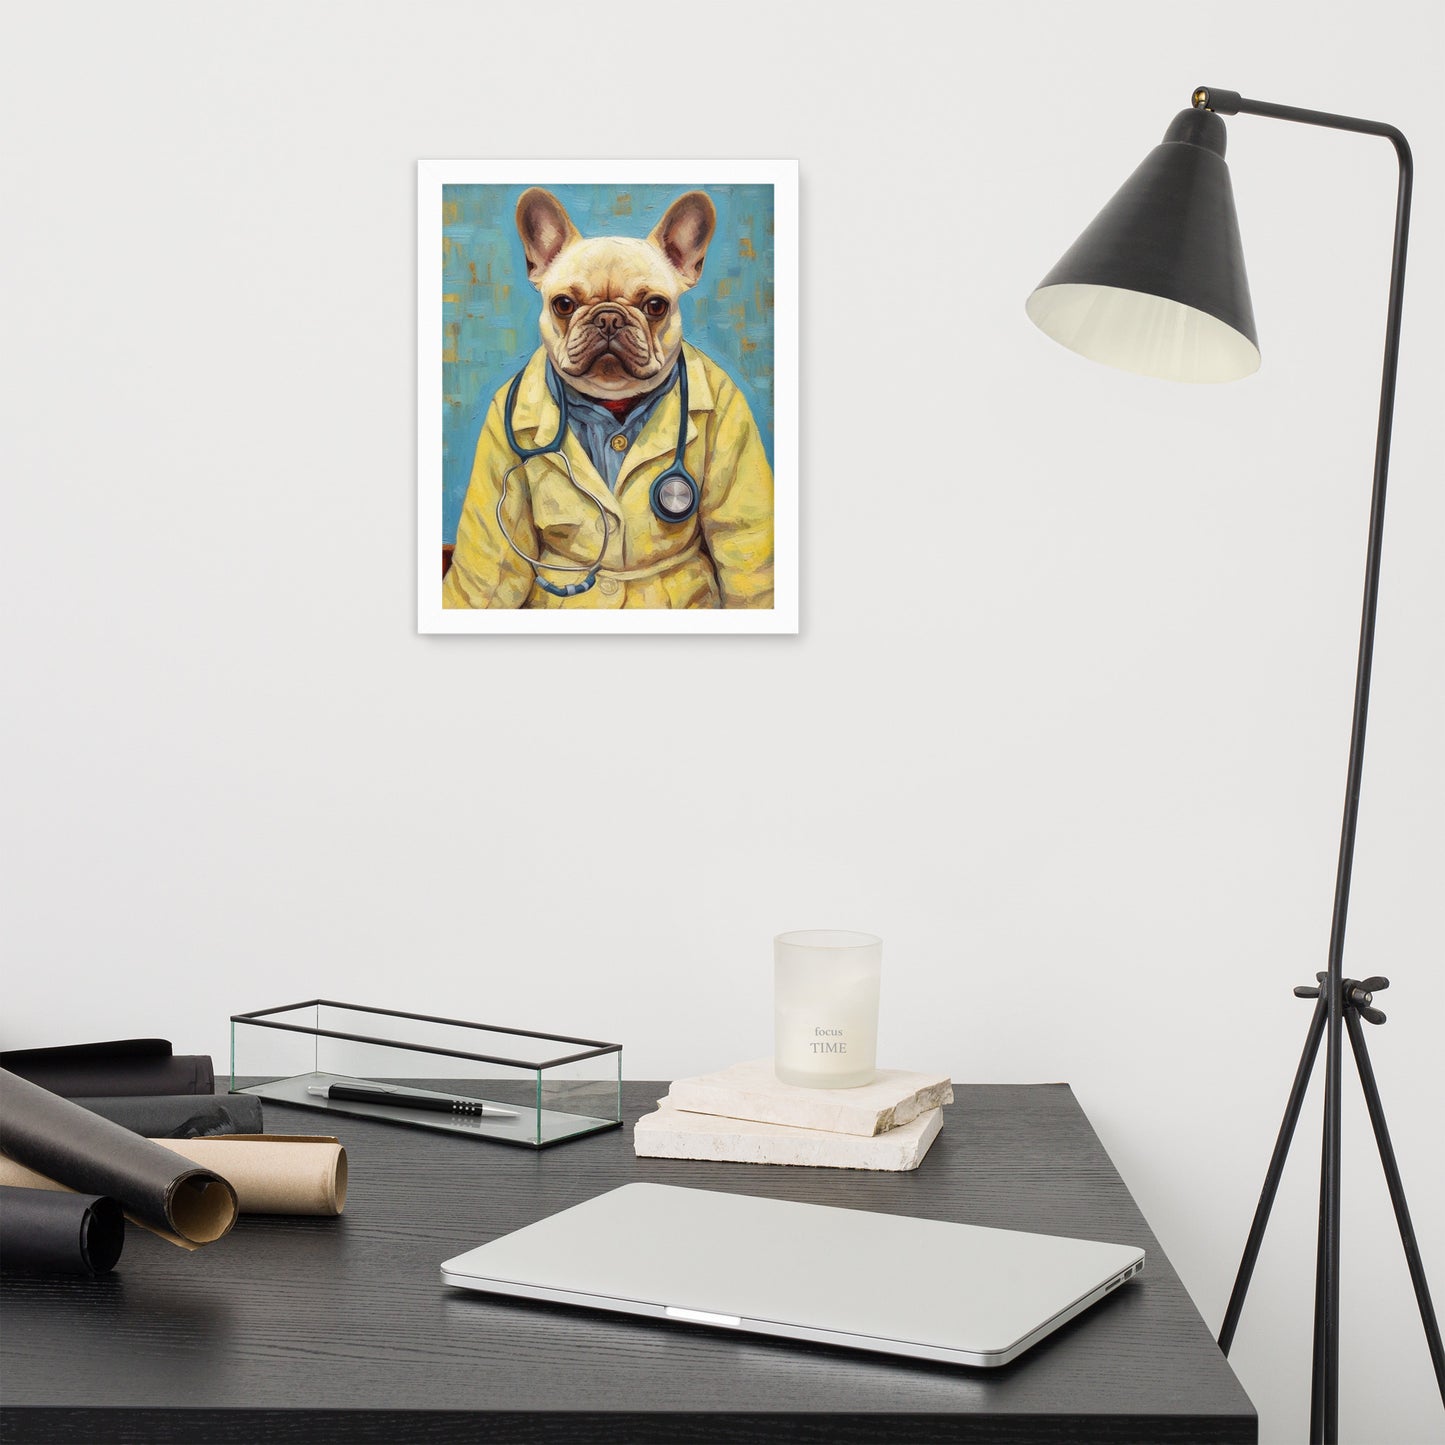 Doctor Frenchie Framed Poster - A Caring and Artistic Choice for Pet Lovers and Medical Professionals